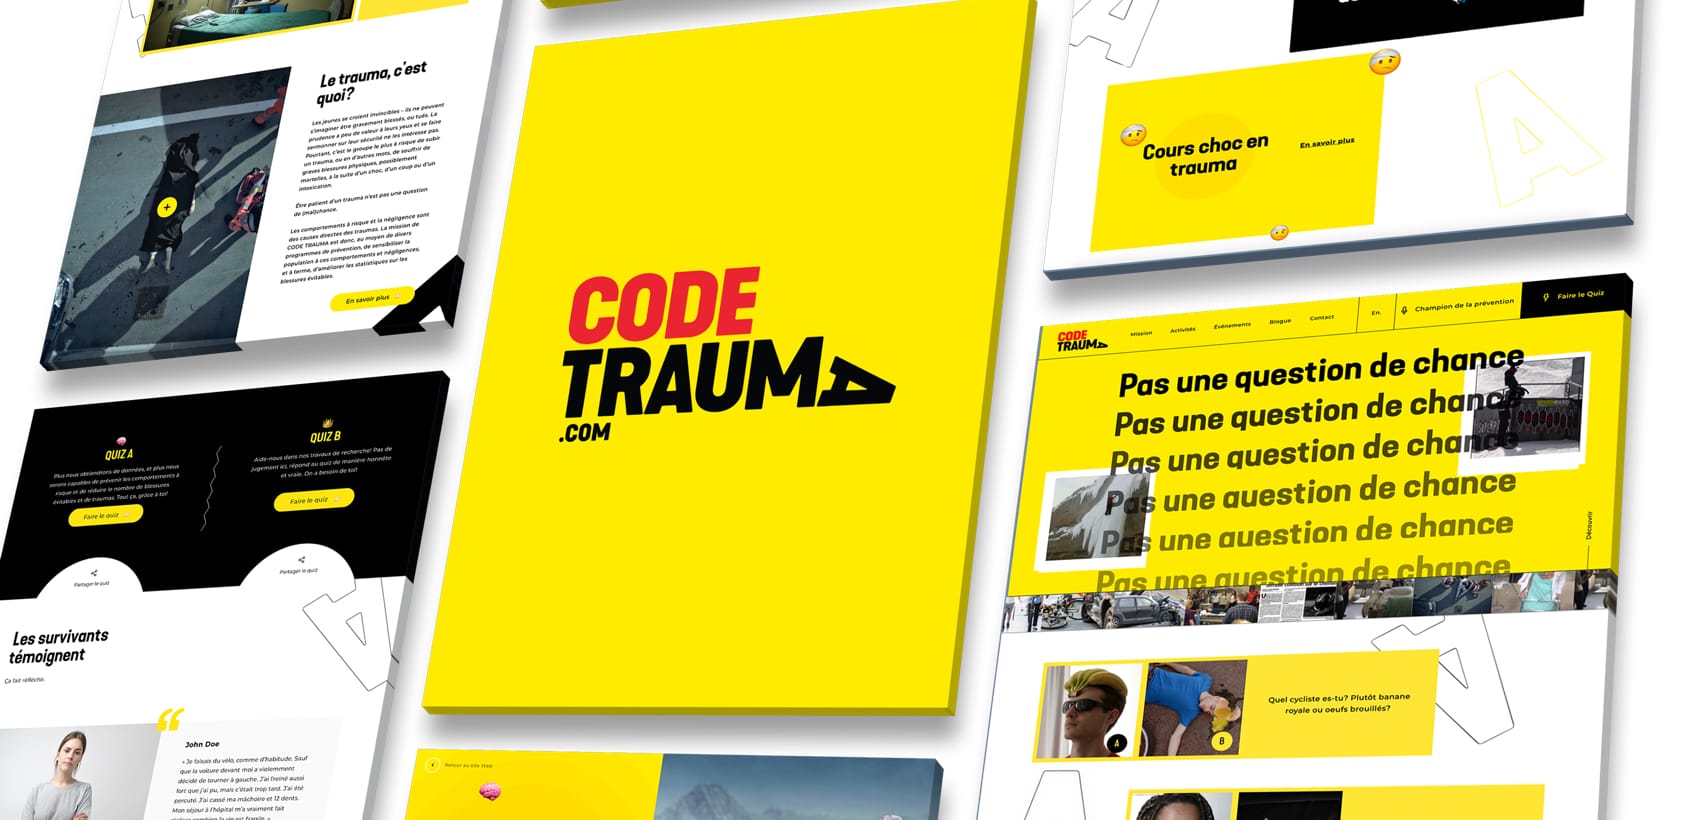 A successful challenge for Code Trauma’s website: making a mark, attracting young audiences and educating them on risky behaviours!